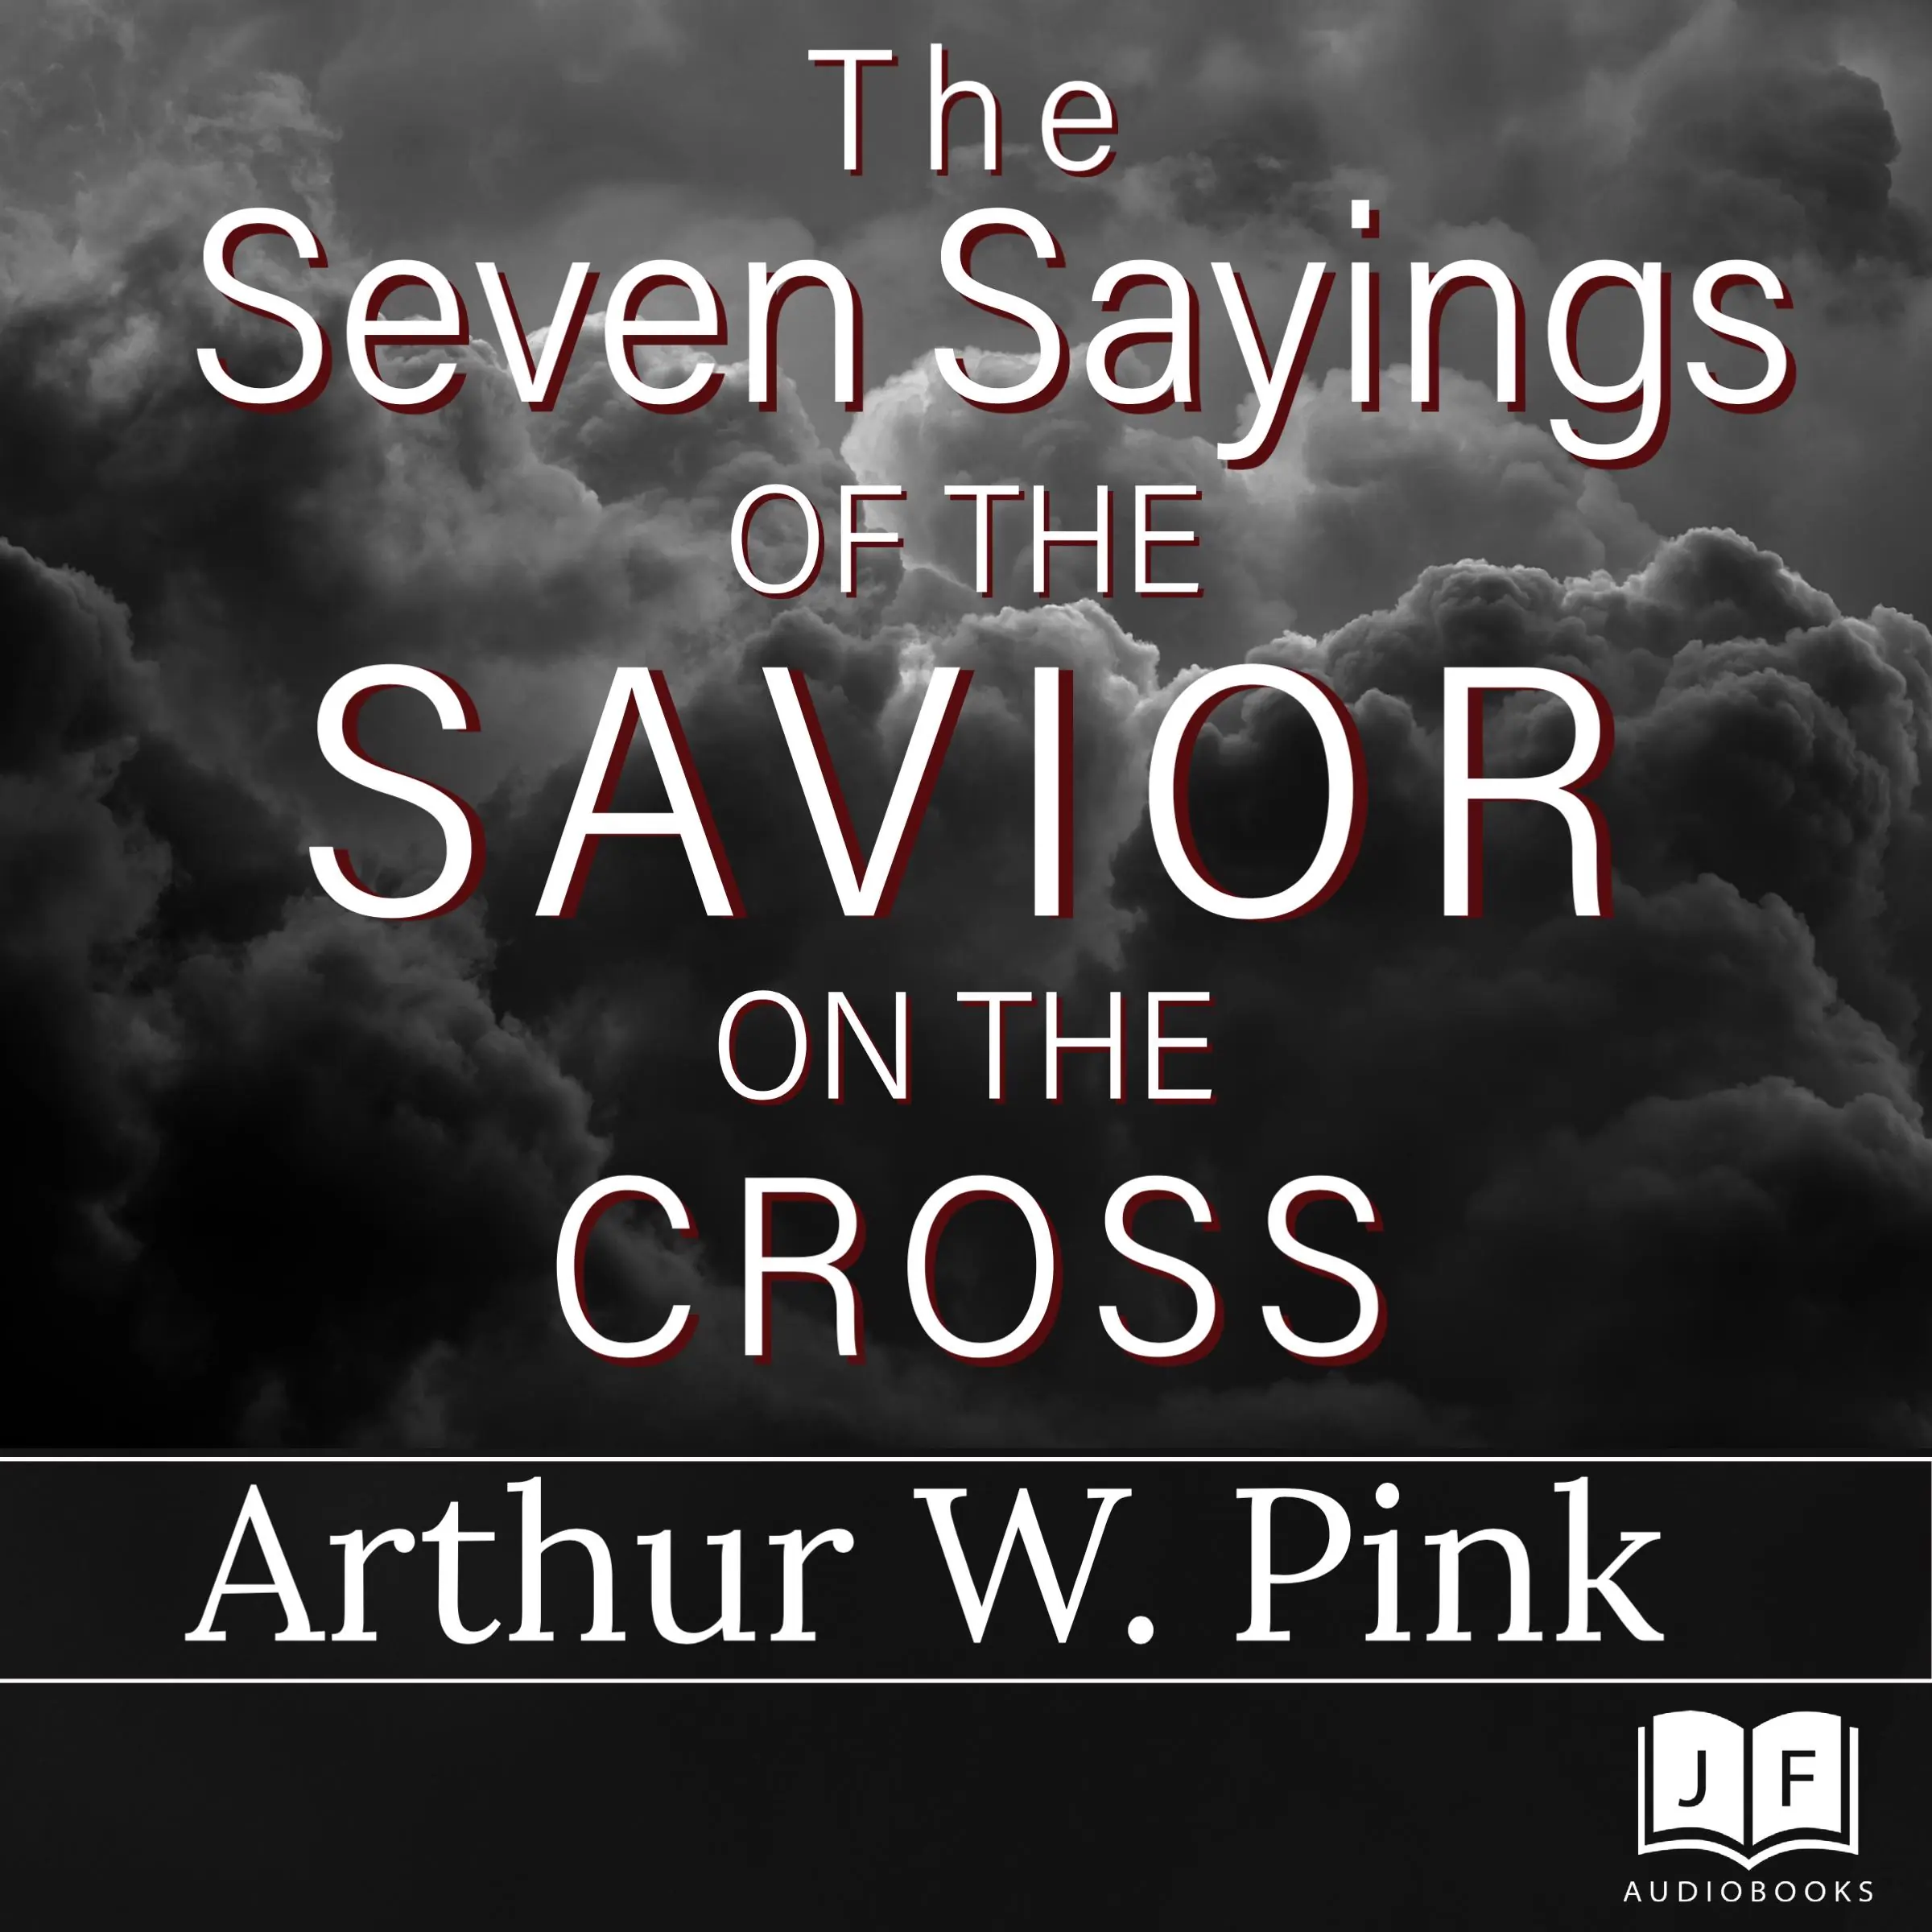 The Seven Sayings of the Savior on the Cross by Arthur W. Pink Audiobook